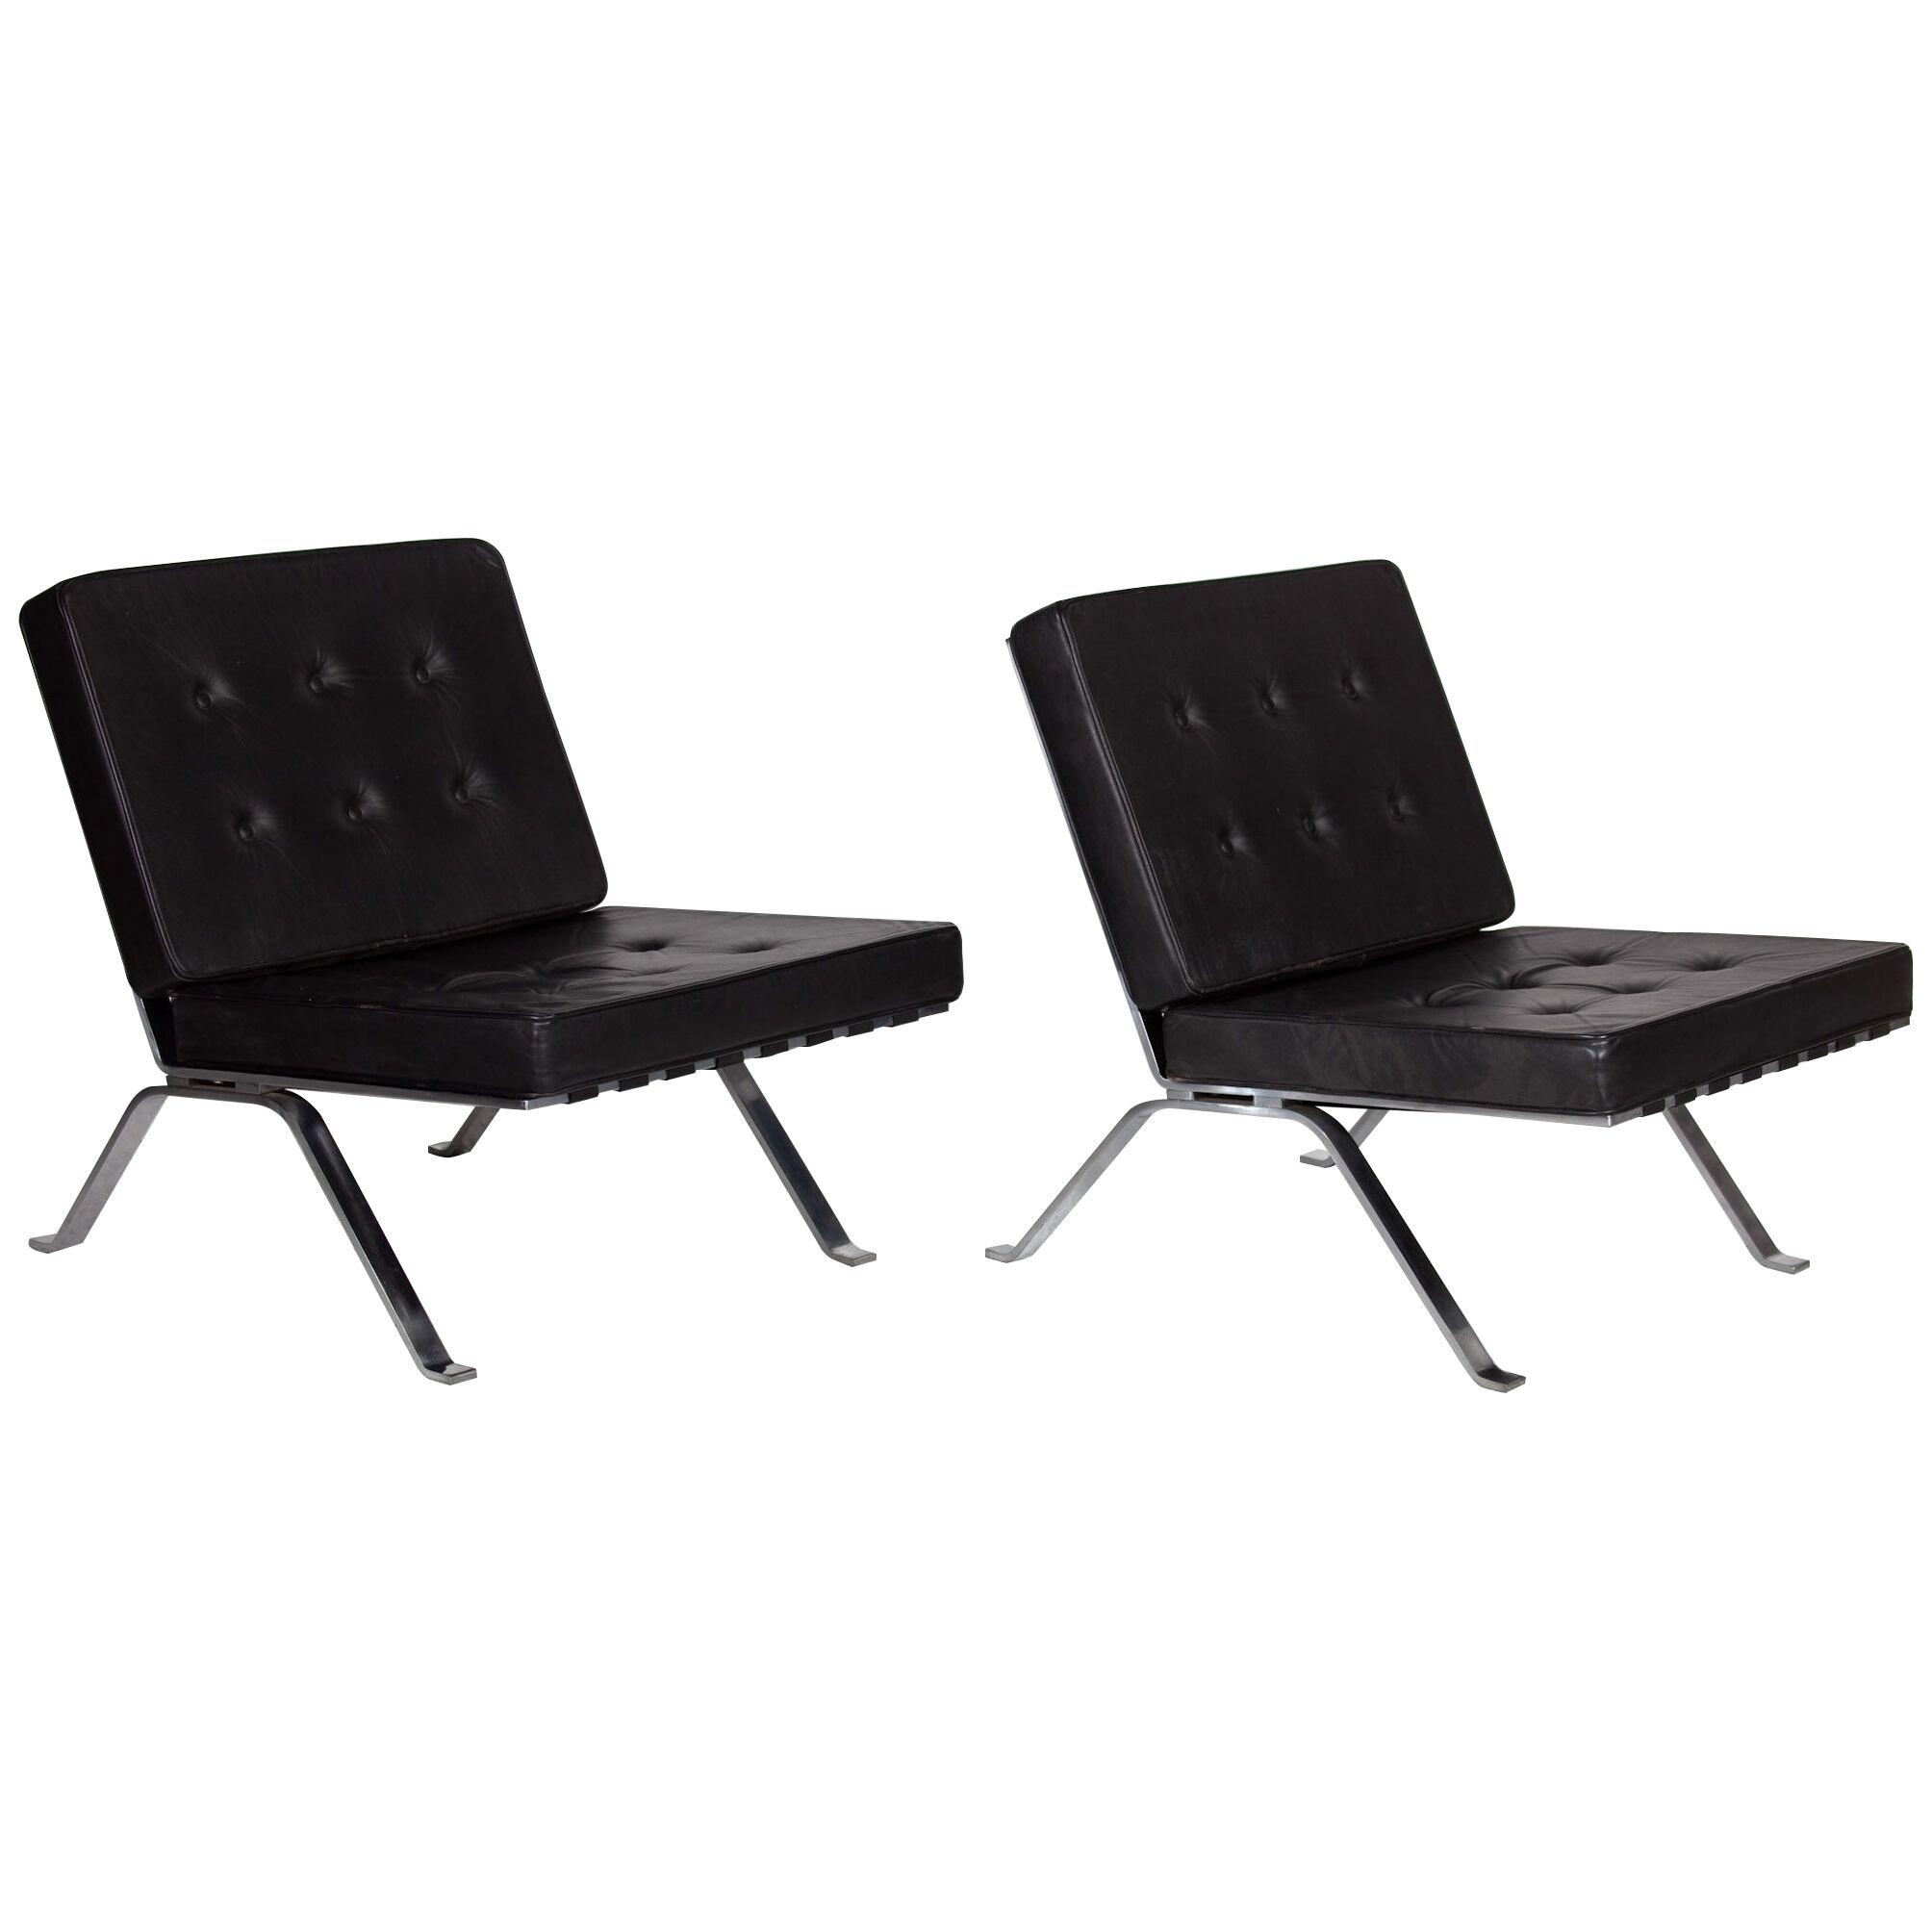 Set of Two Black Leather Lounge Chairs by Hans Eichenberger for Girsberg, 1966